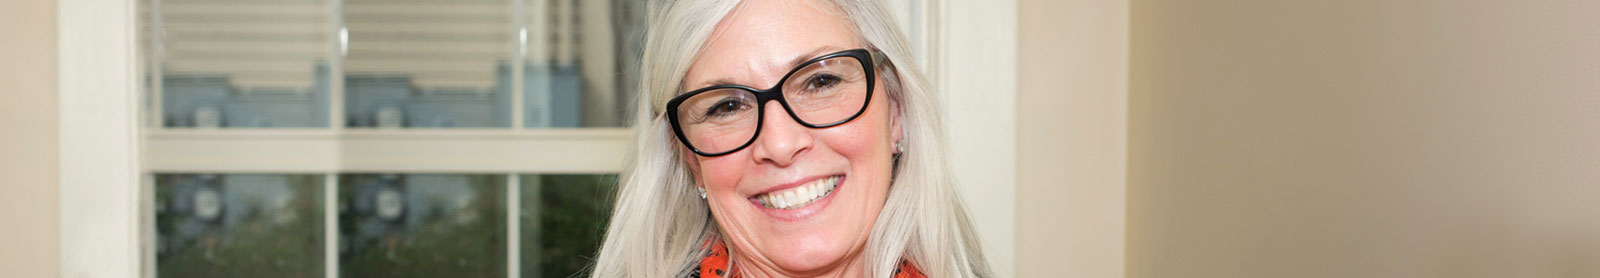 Close up of smiling woman wearing glasses